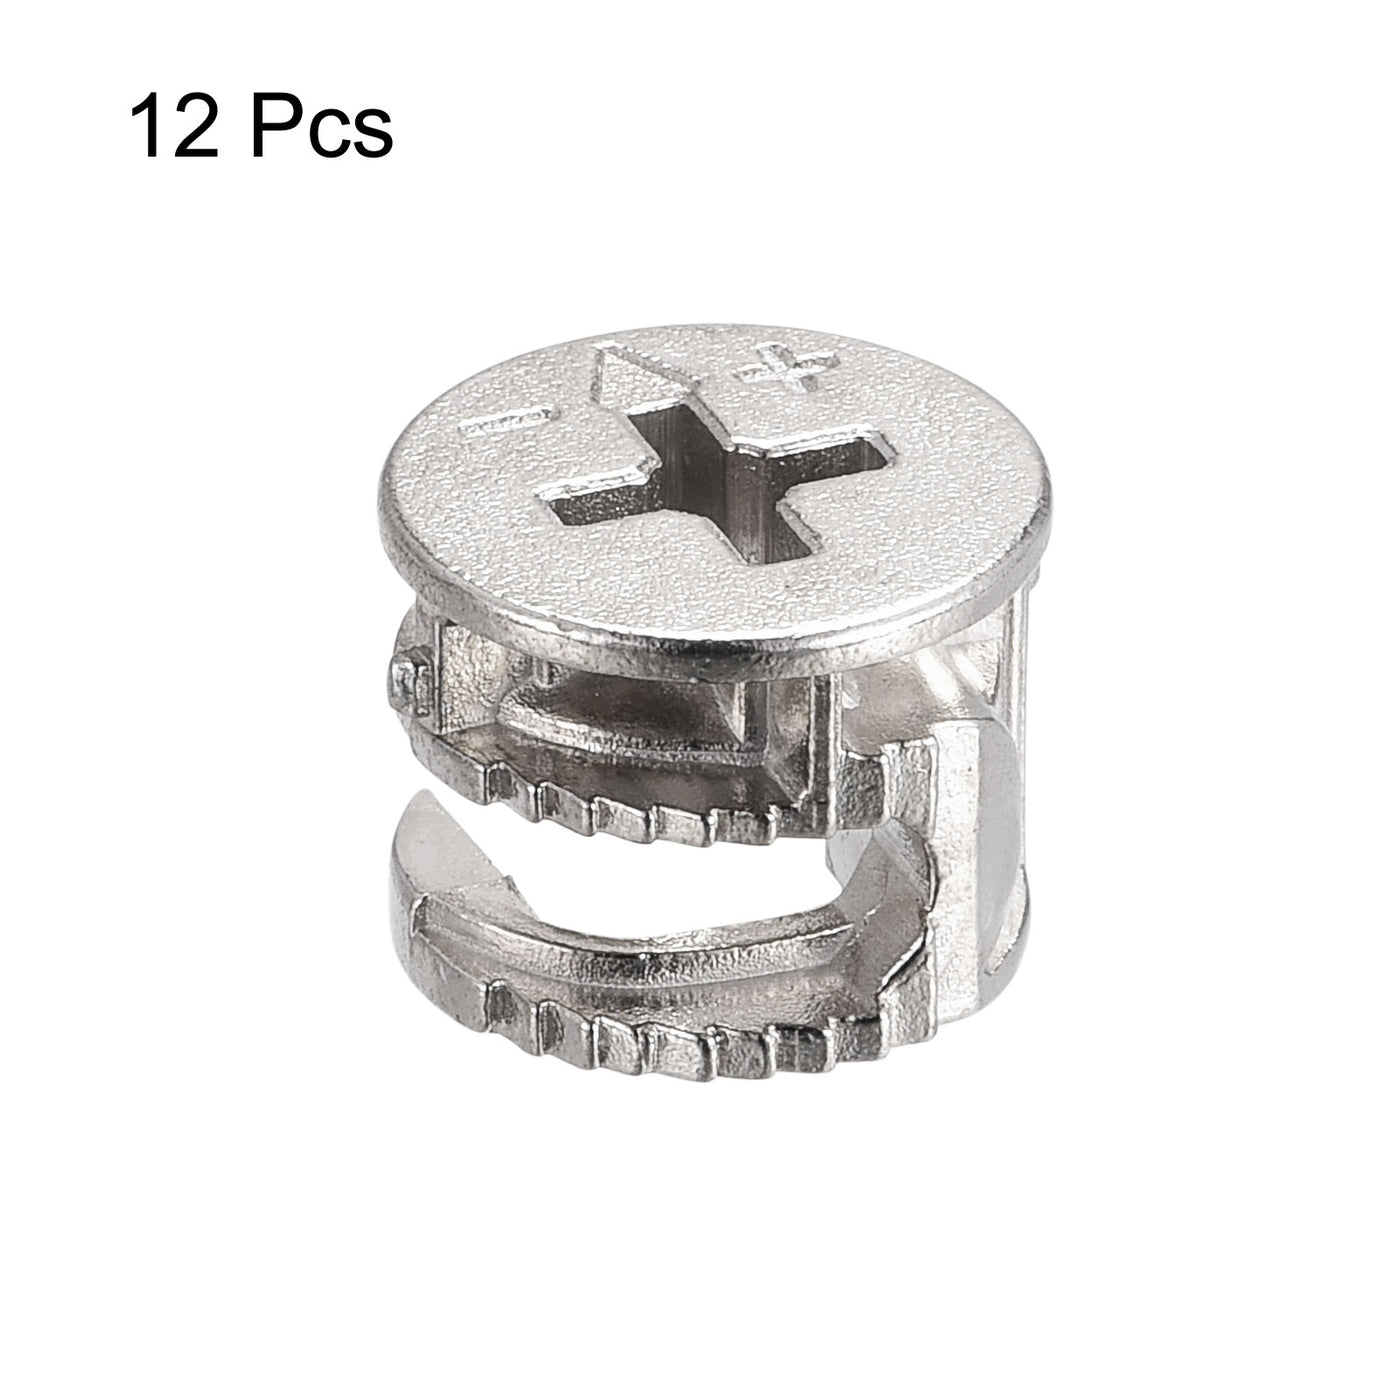 Uxcell Uxcell Cam Lock Nut for Furniture, 12pcs 14.6x11.3mm Joint Connector Locking Nuts